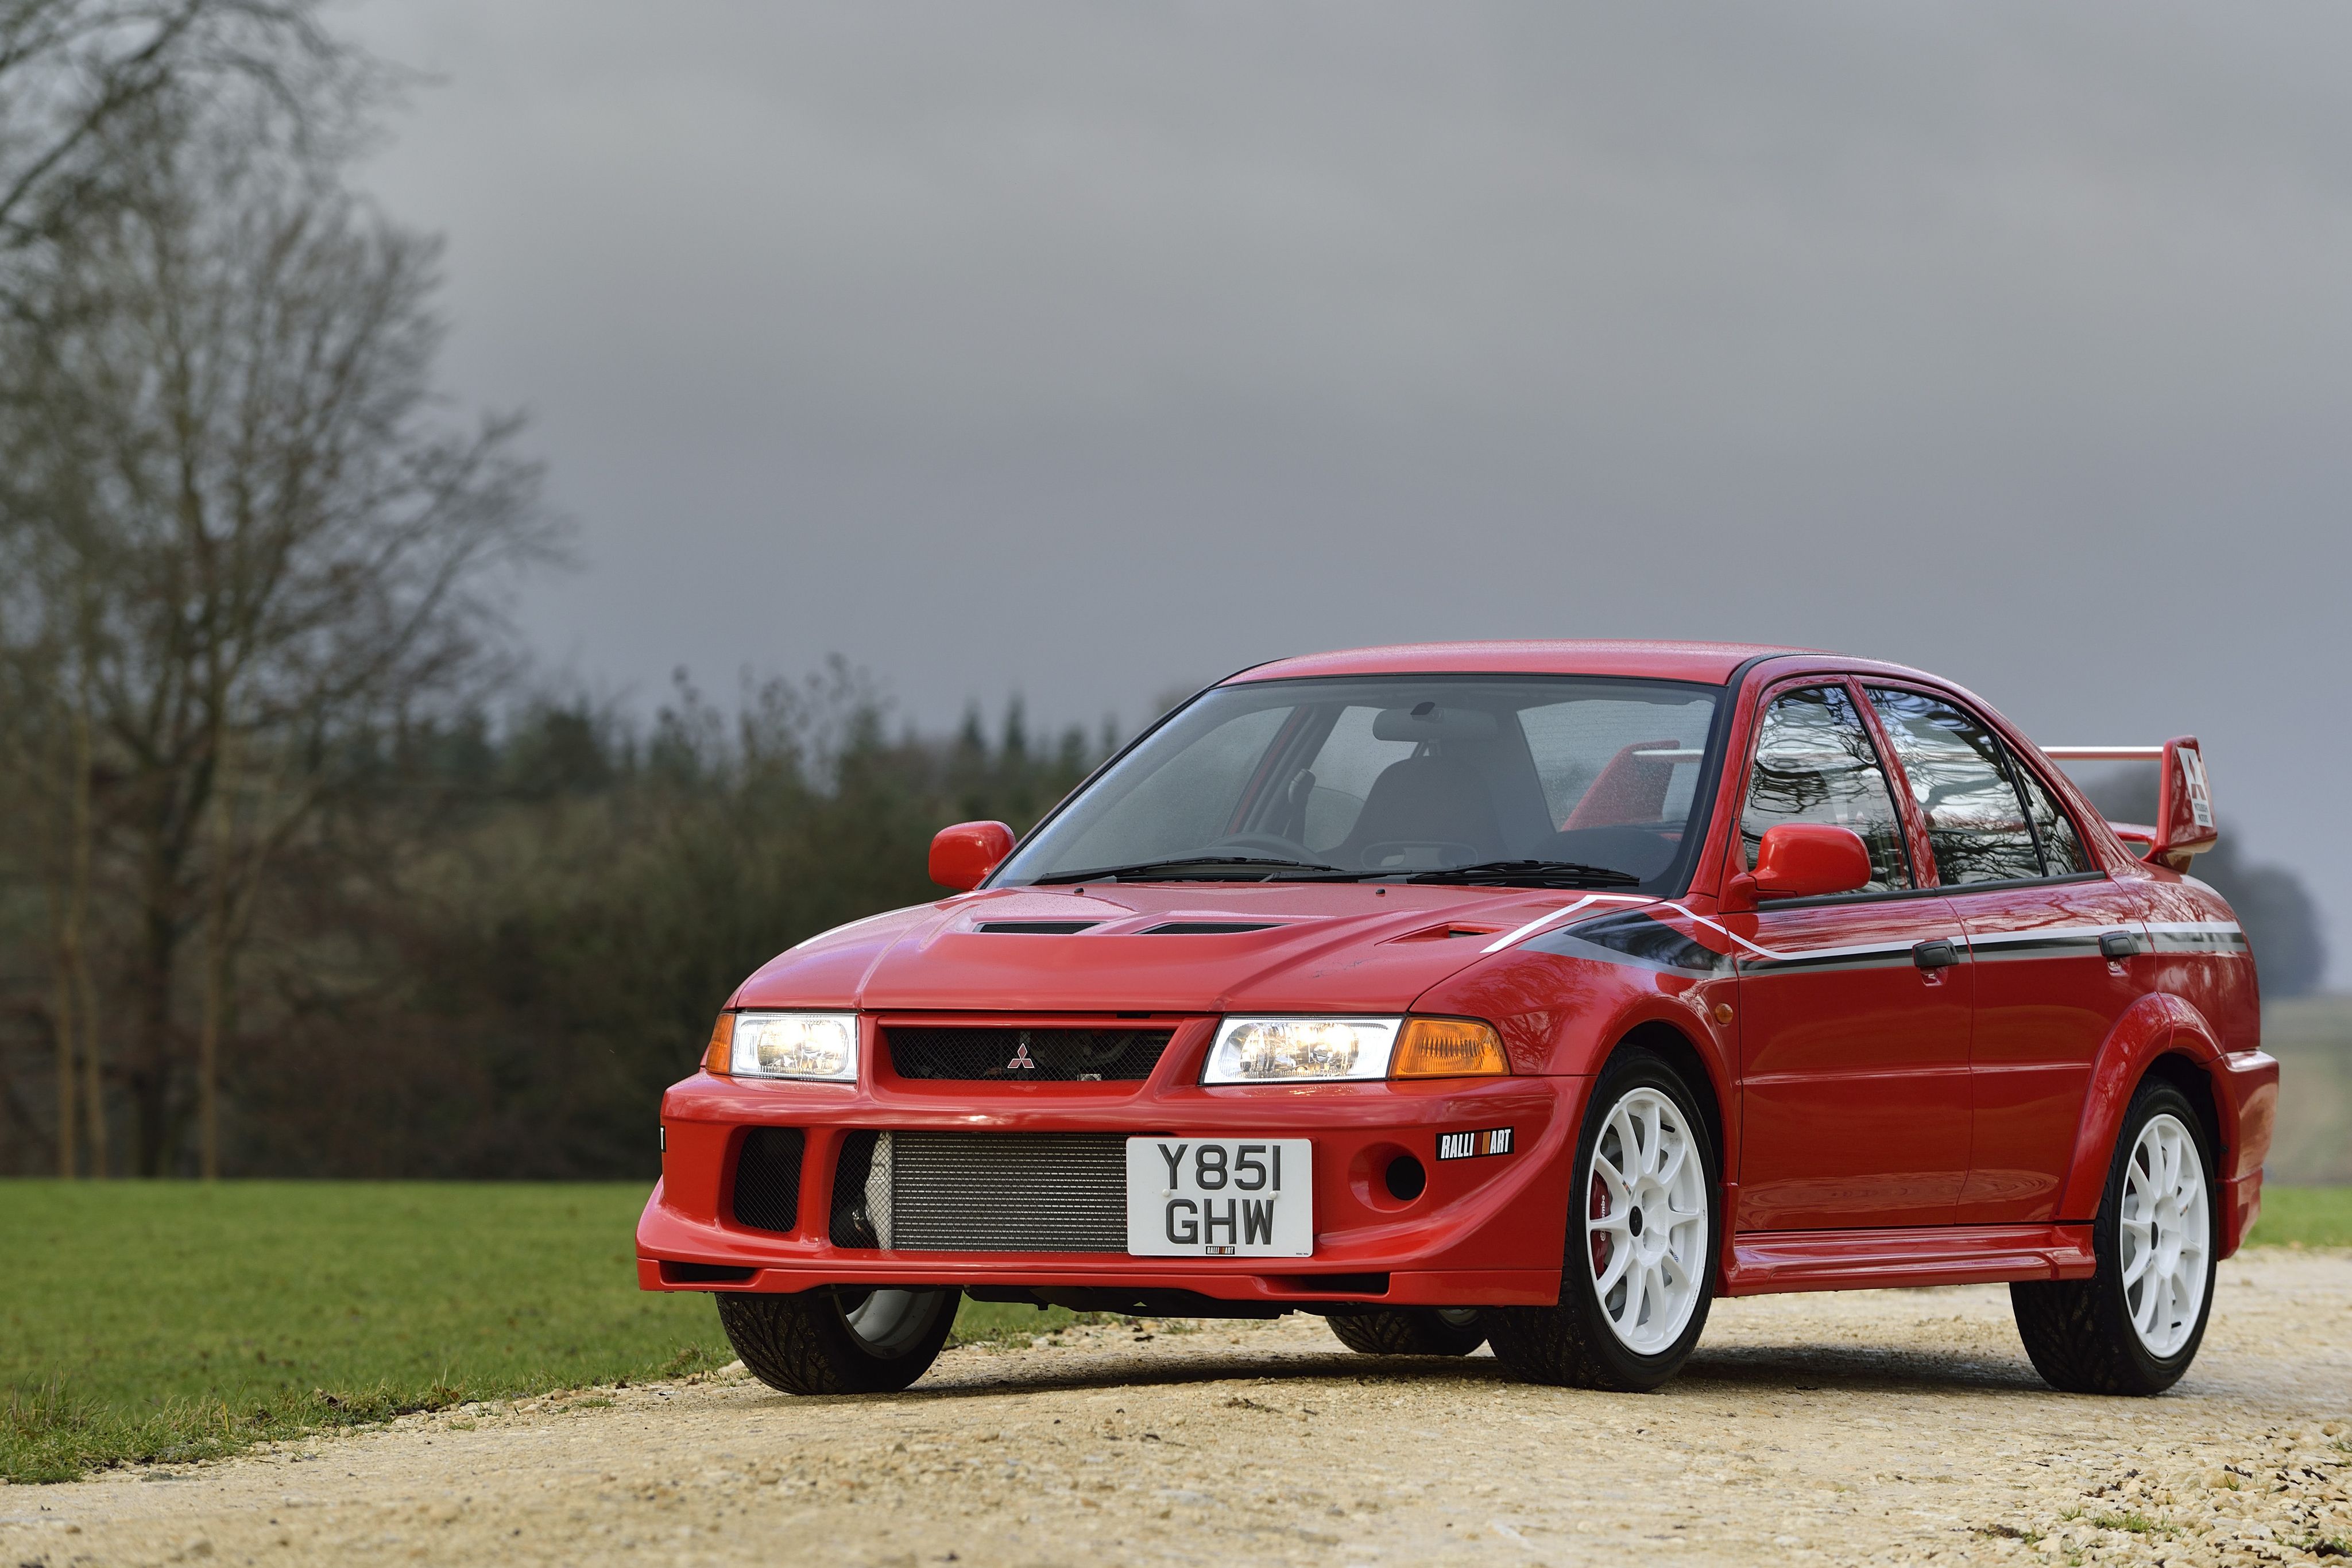 Special limited edition Lancer Evo Tommi